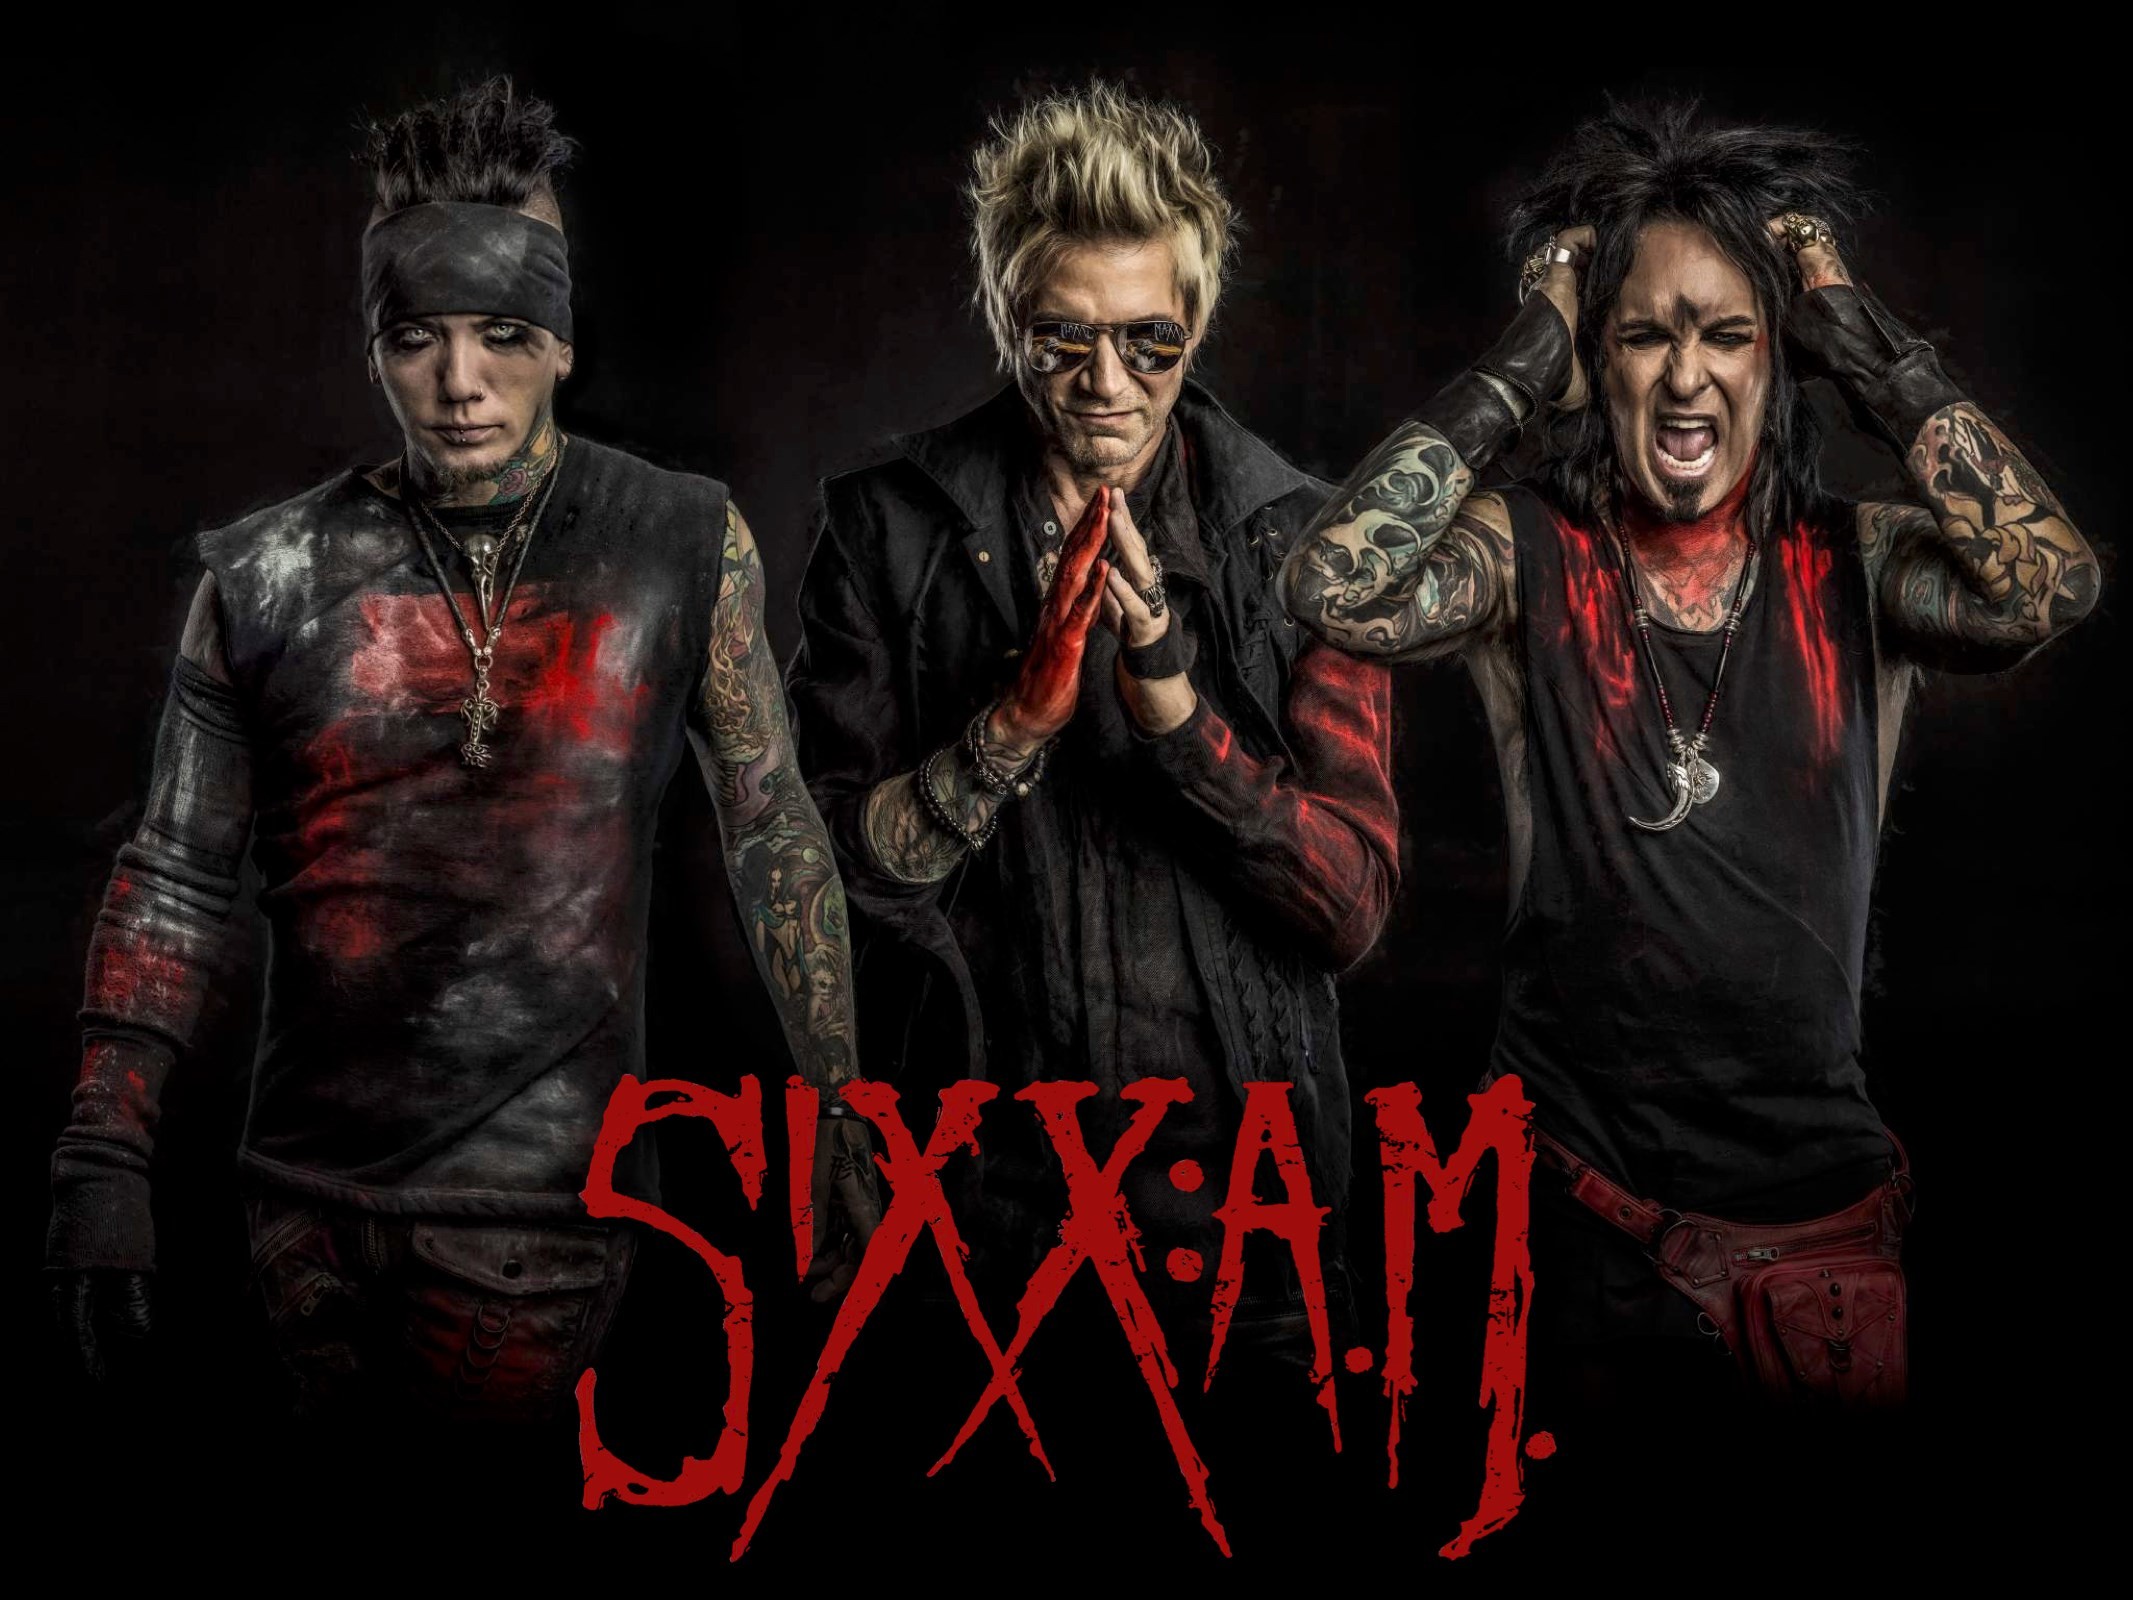 , The Band Featuring Mãtley Crãe Bassist Nikki Sixx - Sixx Am This Is Gonna - HD Wallpaper 